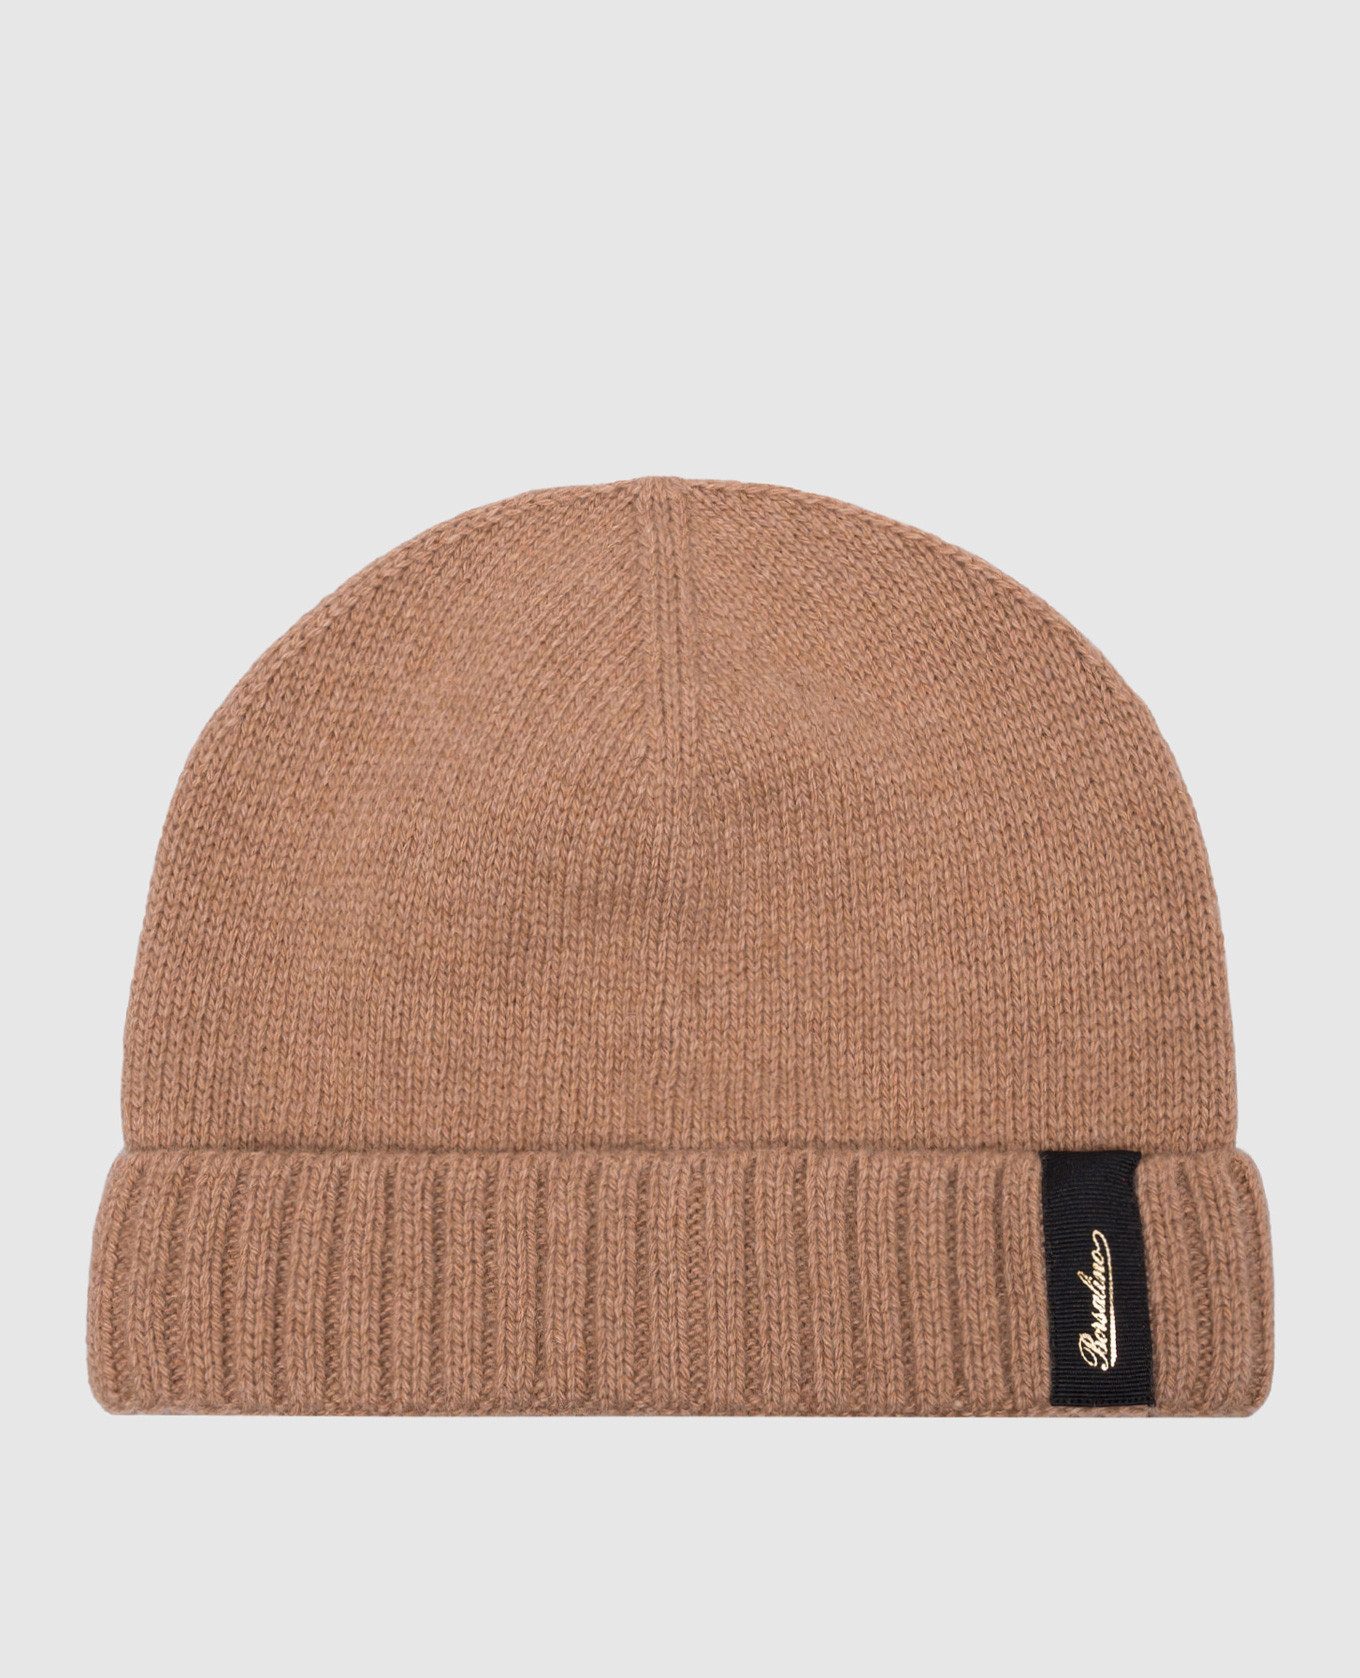 Brown cashmere hat with logo